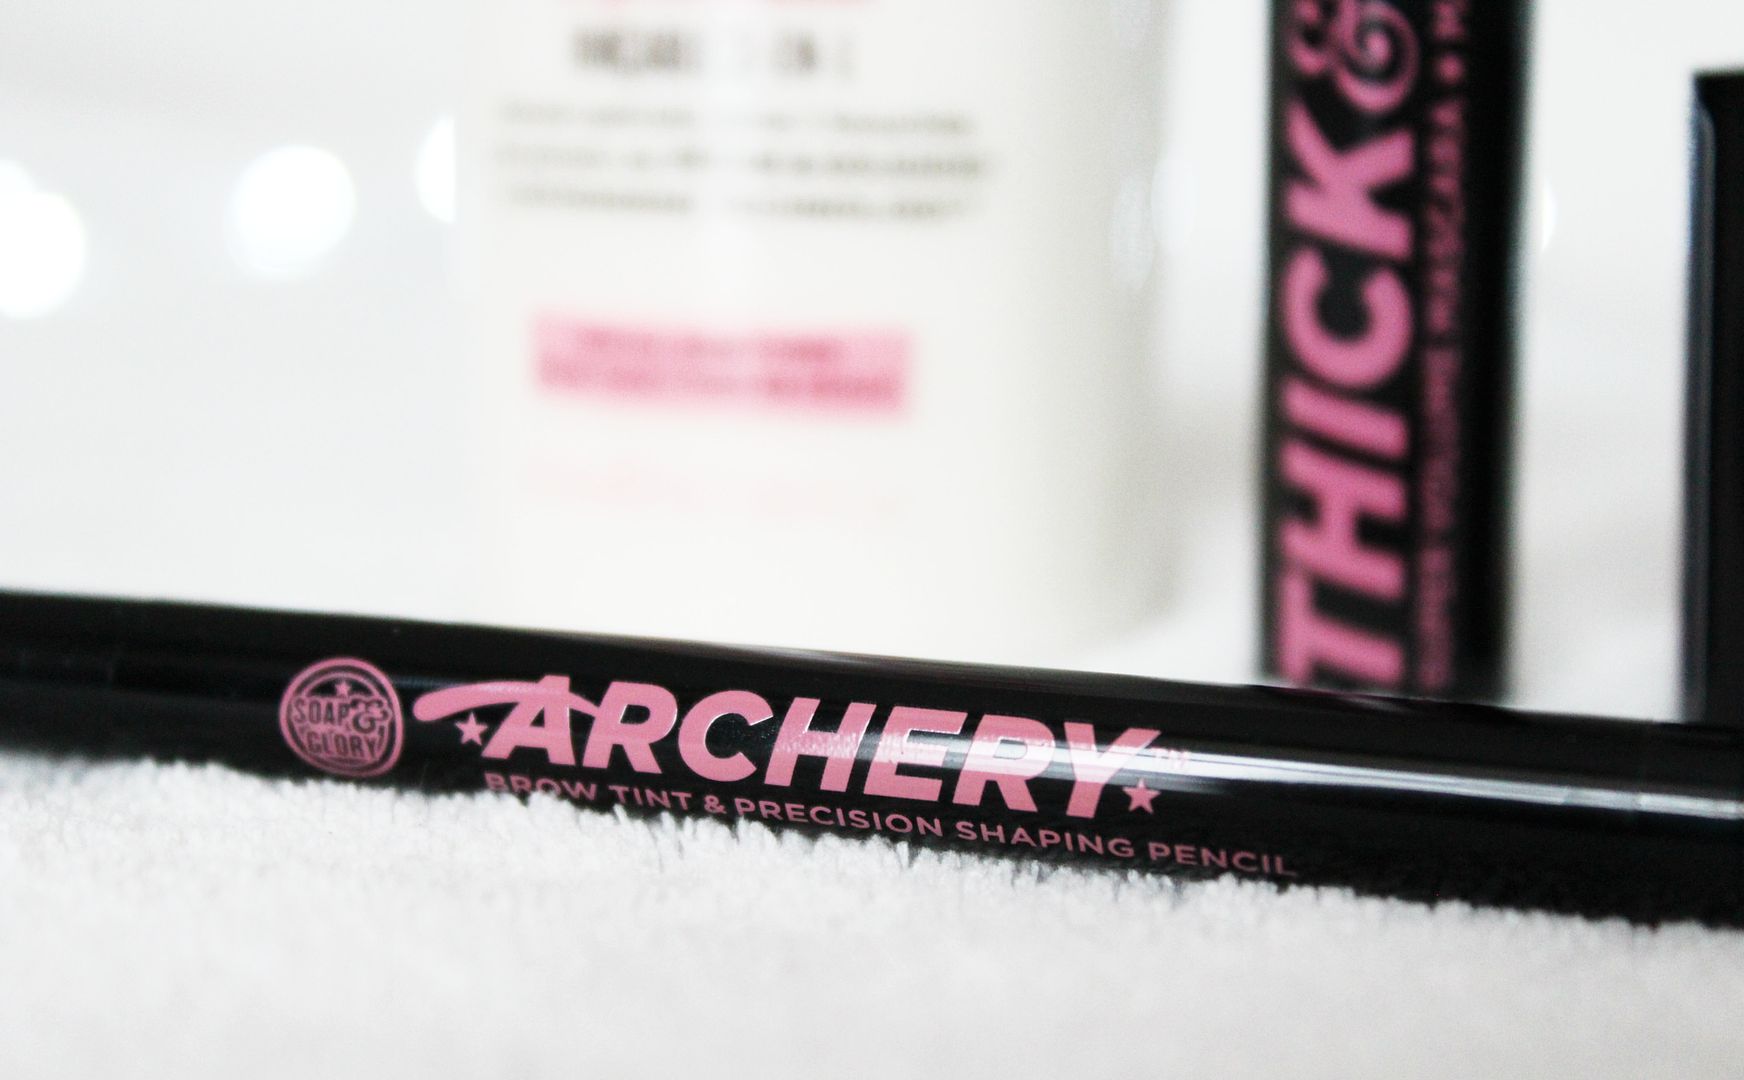 Soap And Glory Beauty Haul Winter 2015 Archery Brow Tint Pencil Brownie Points Belle-Amie UK Beauty Fashion Lifestyle Blog